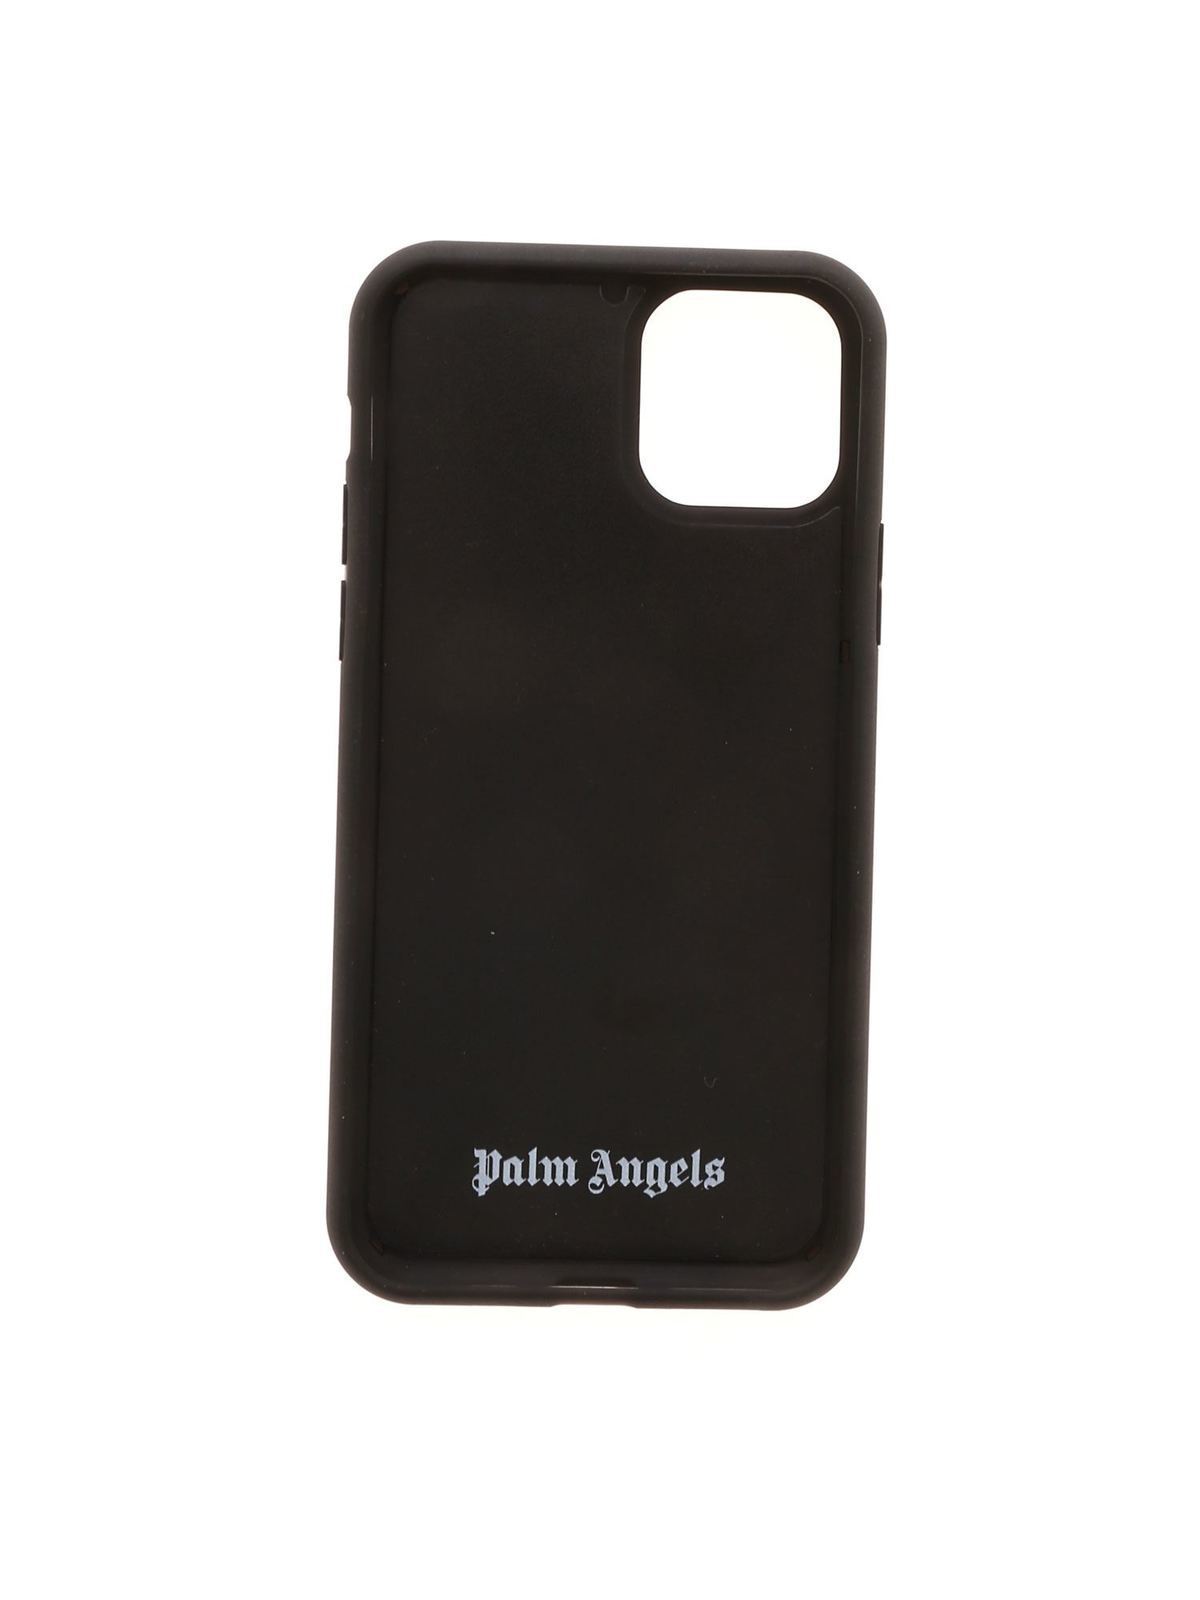 Iphone 11 pro case with logo in black